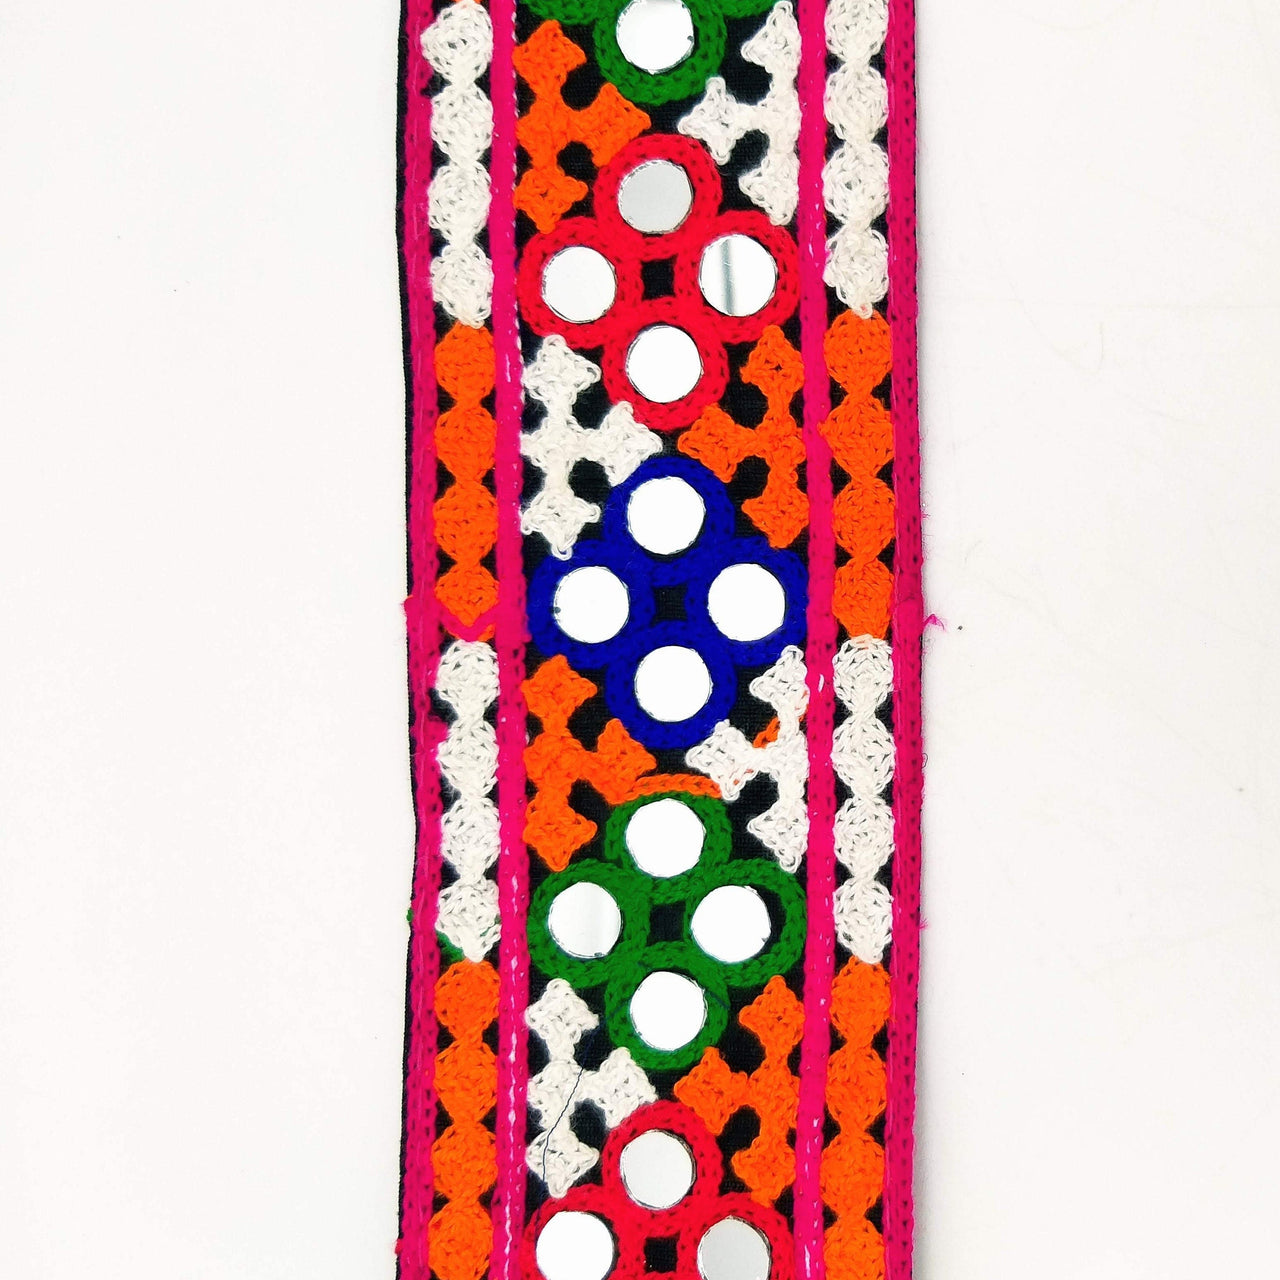 Black Cotton Fabric Trim with Multicolor Embroidery and Real Mirror, Kutch Embroidery Trim, Mirror Lace